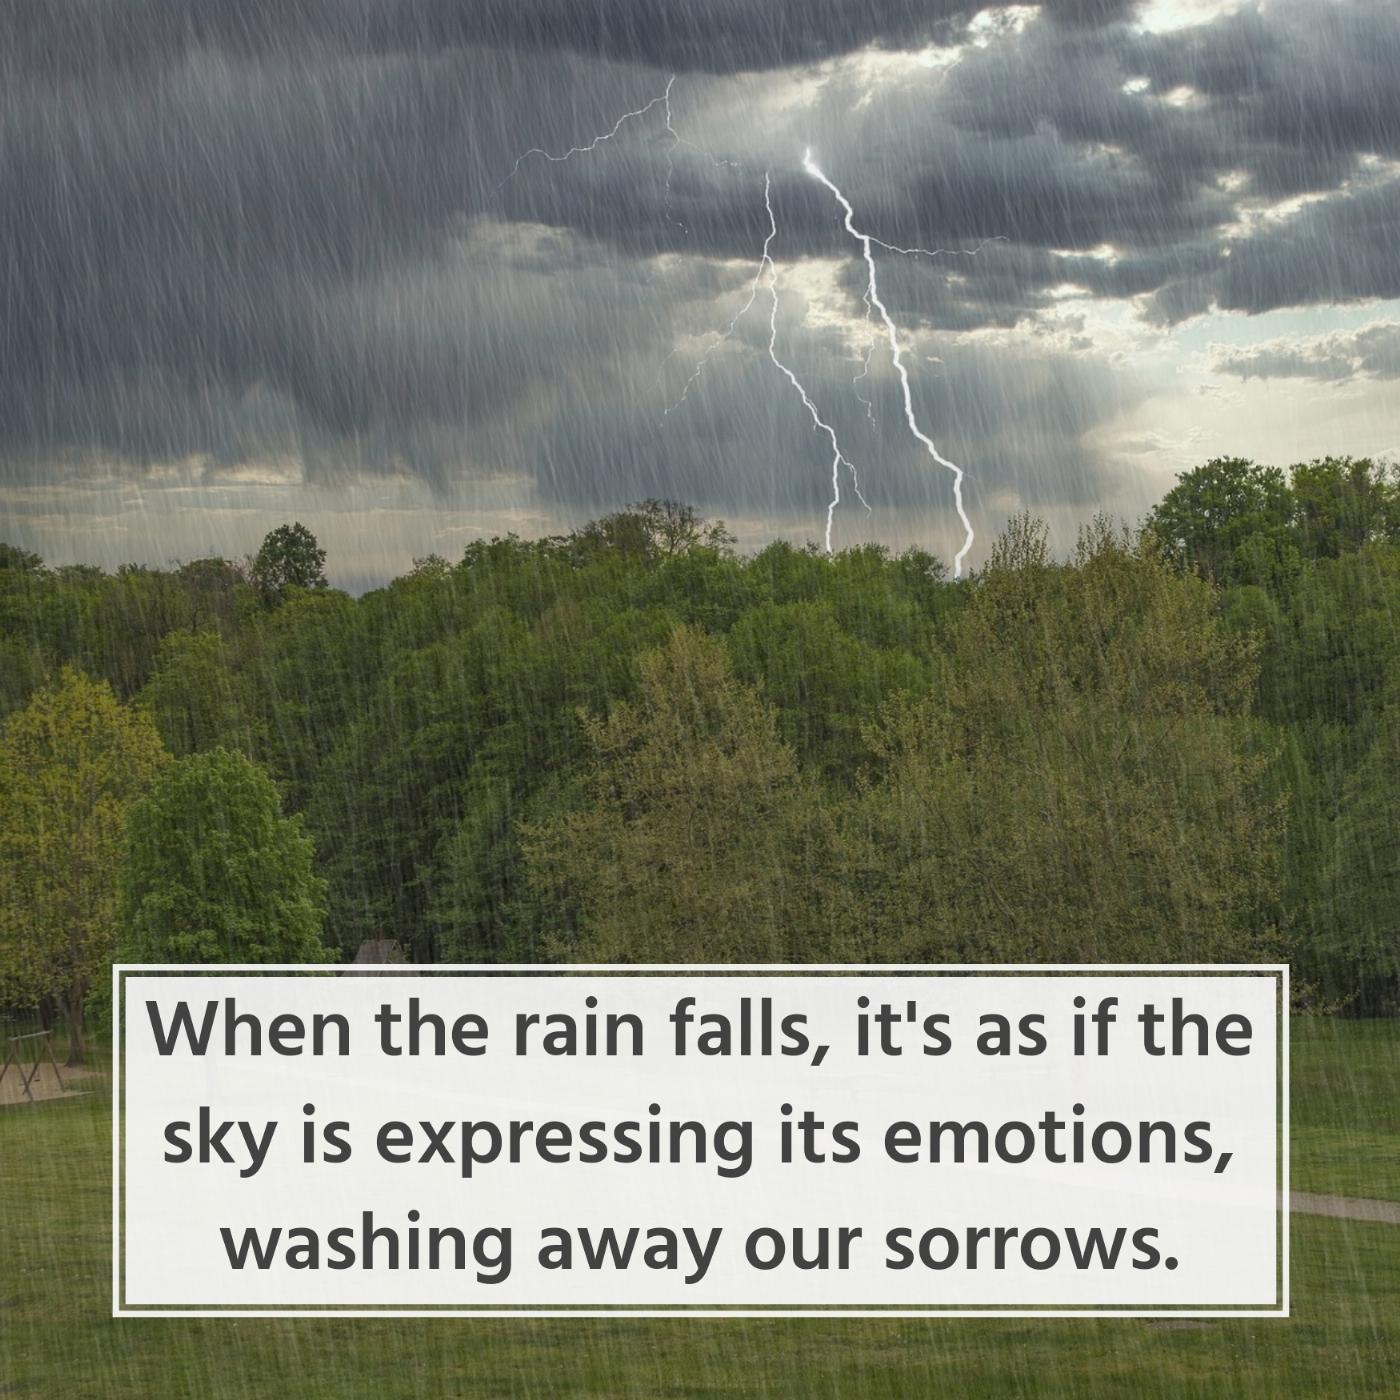 When the rain falls it's as if the sky is expressing its emotions